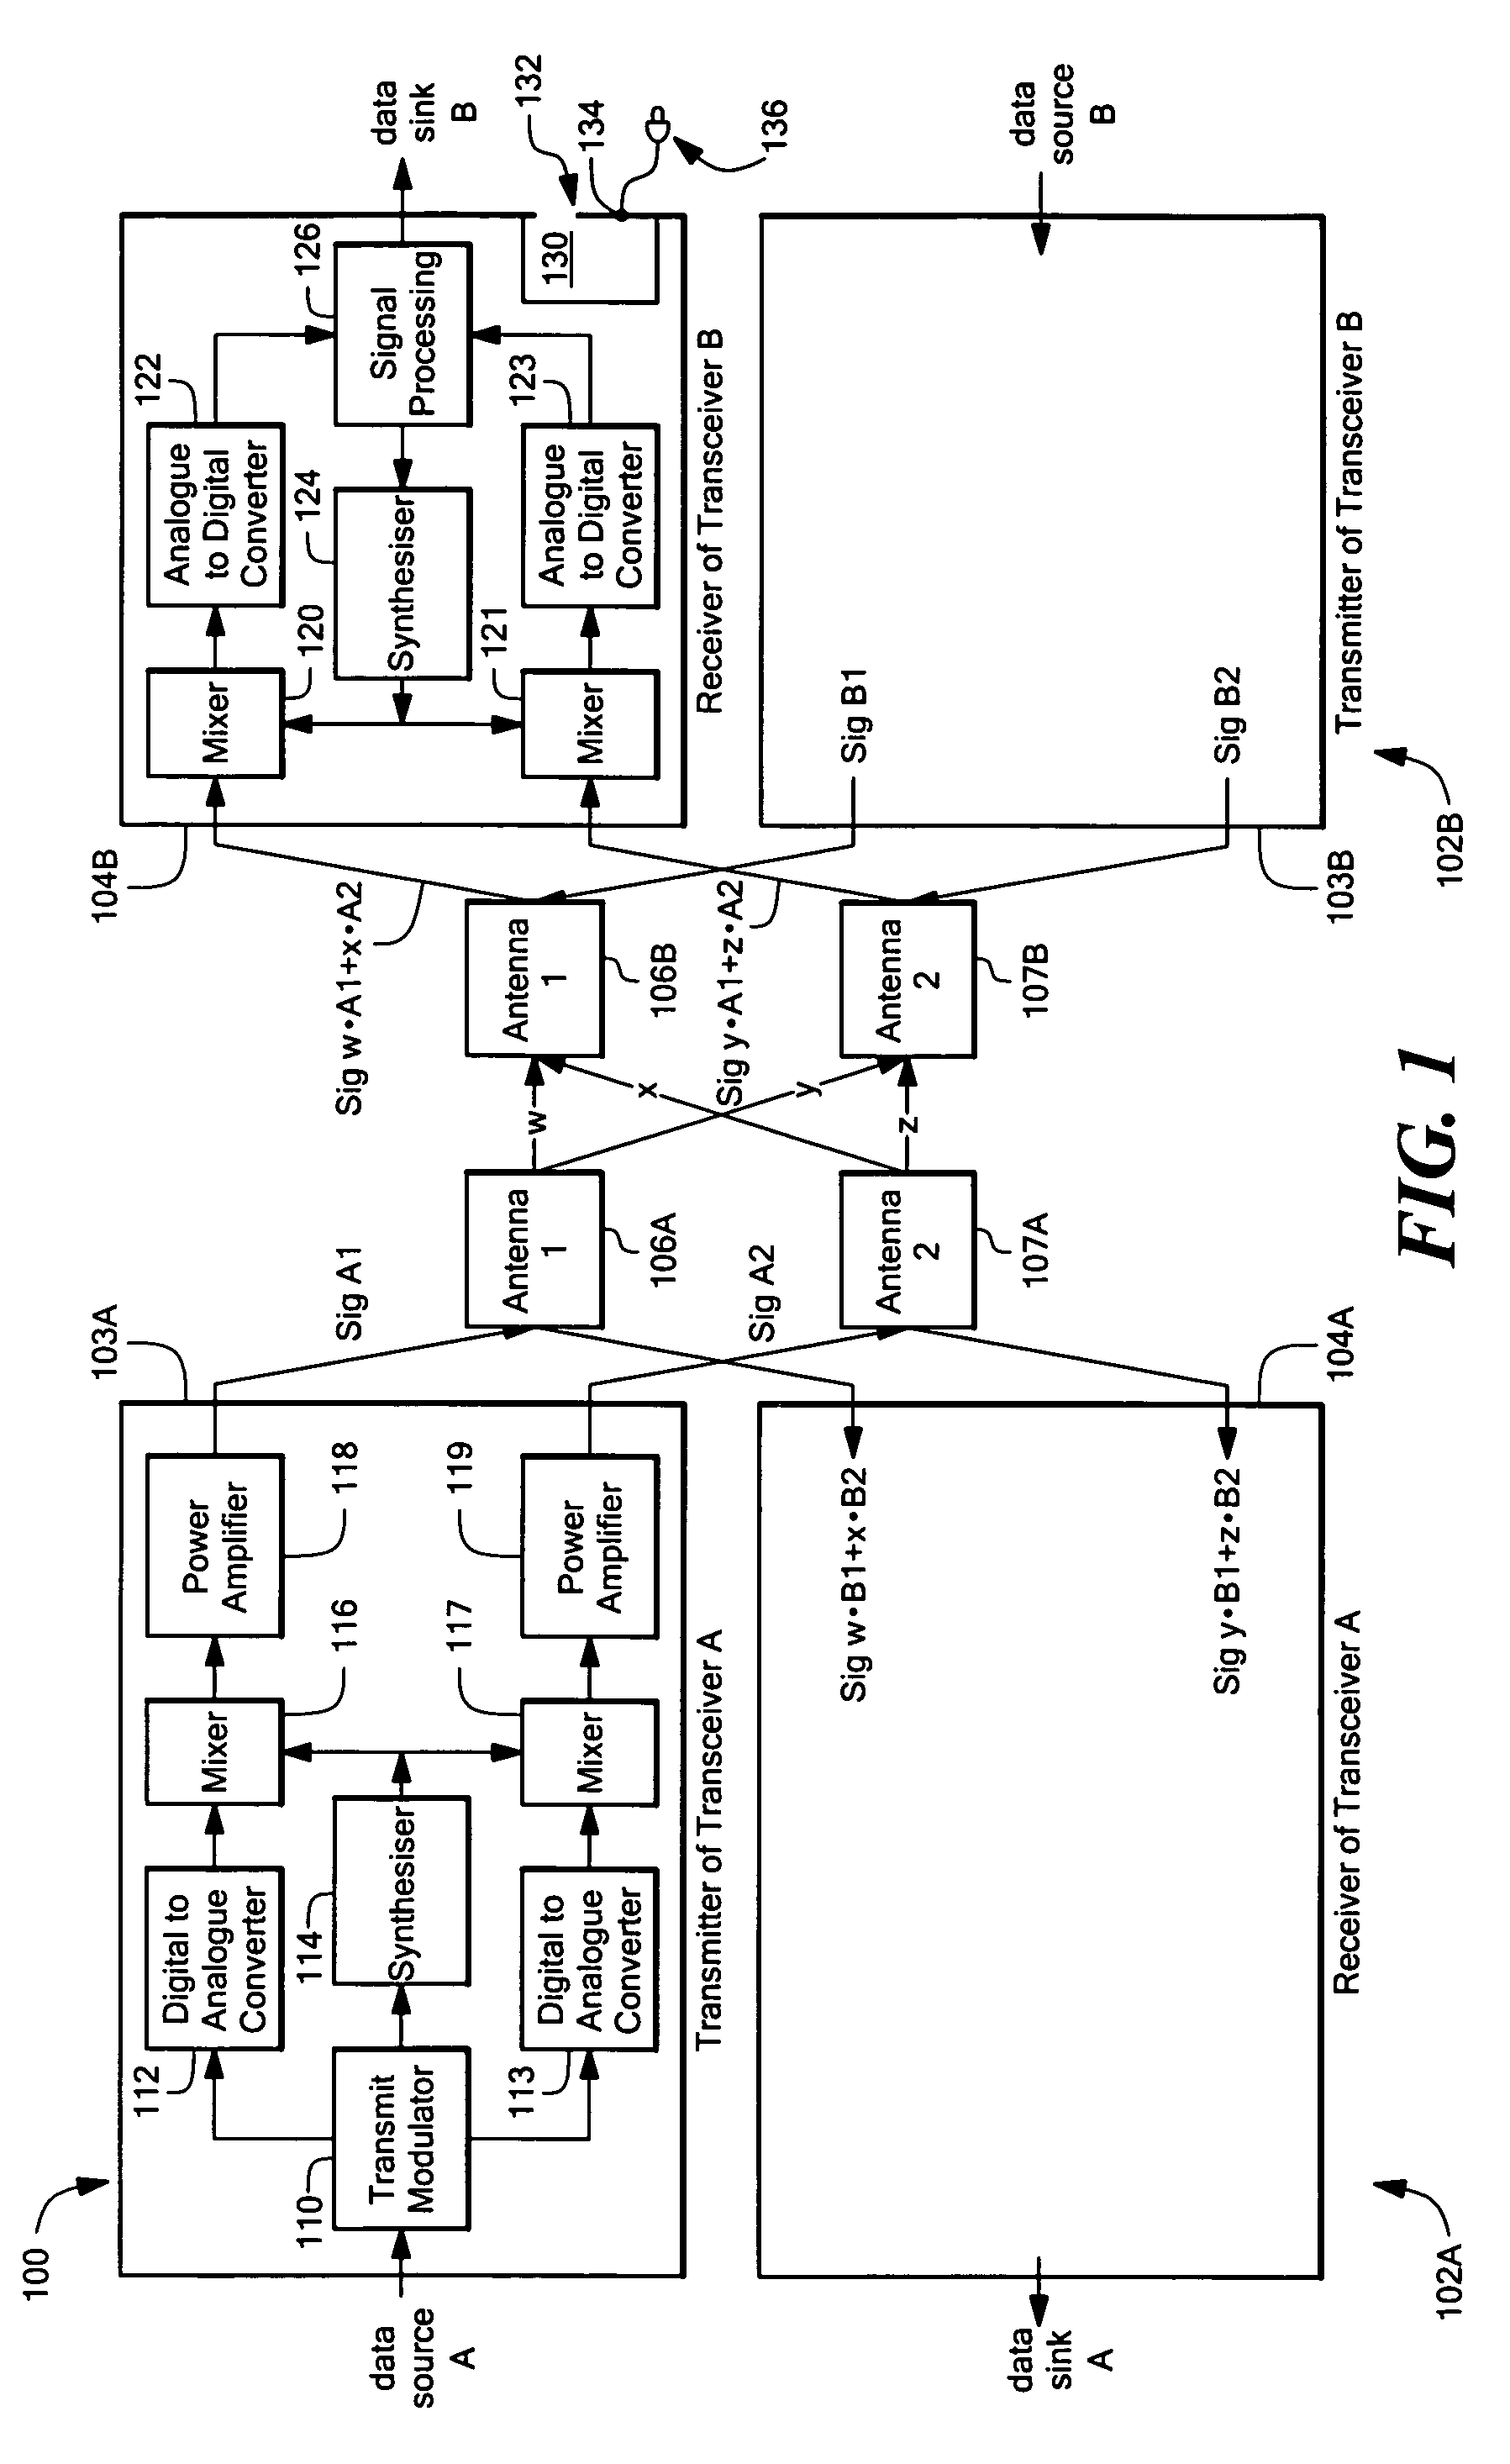 Installation technique for a multiple input multiple output (MIMO) wireless communications systems